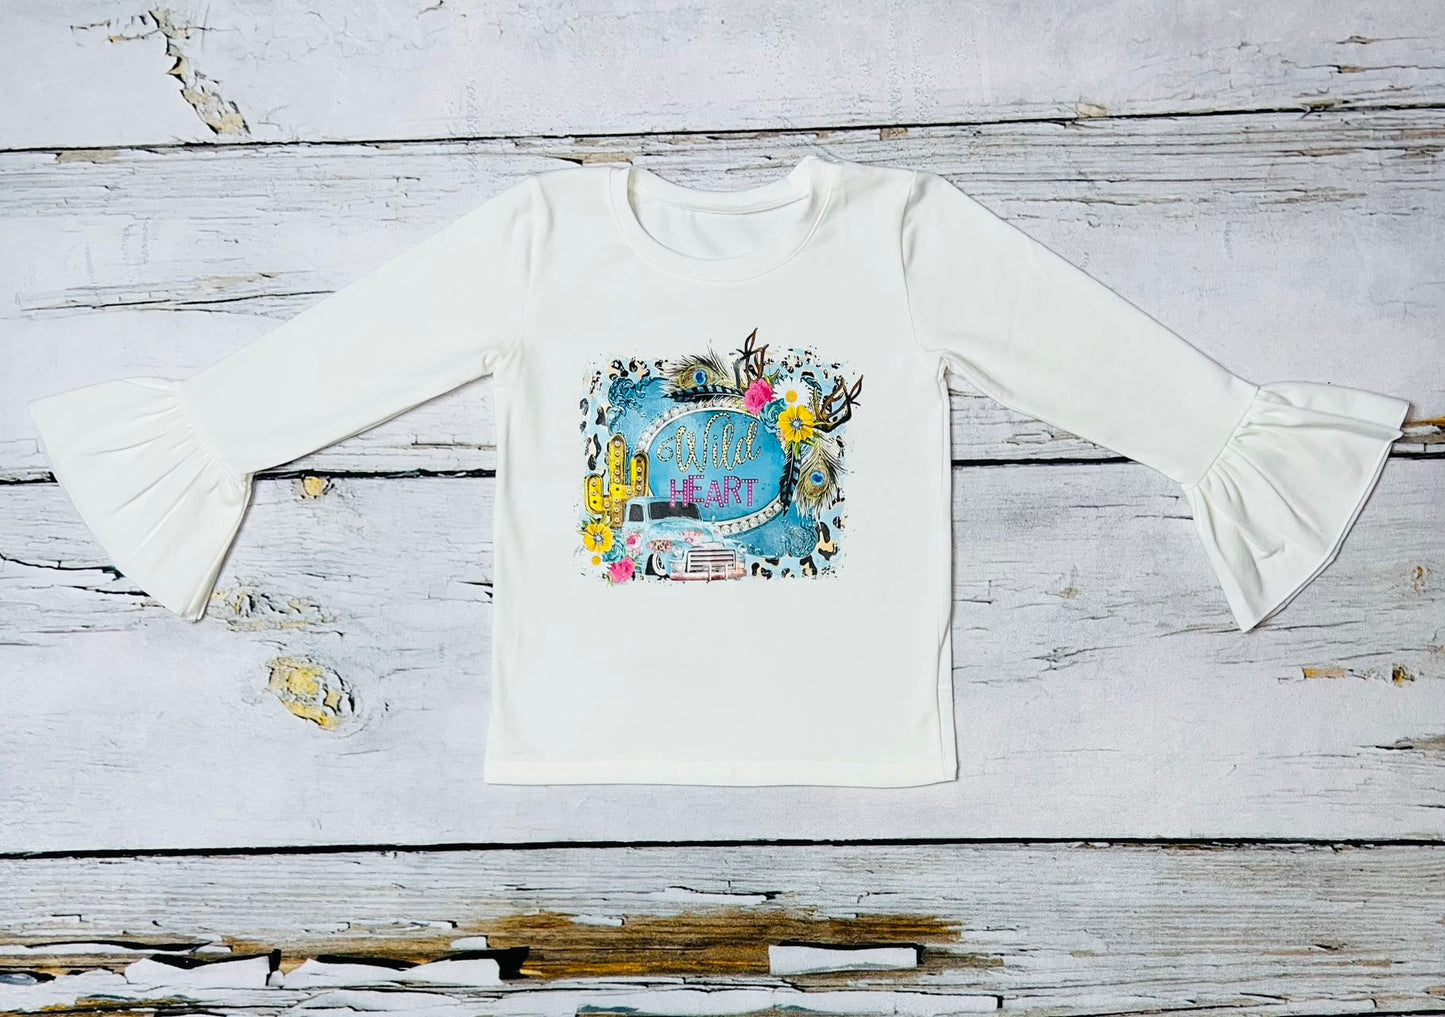 "Wild Heart" white w/a vintage truck long sleeve bell top DLH0913-10